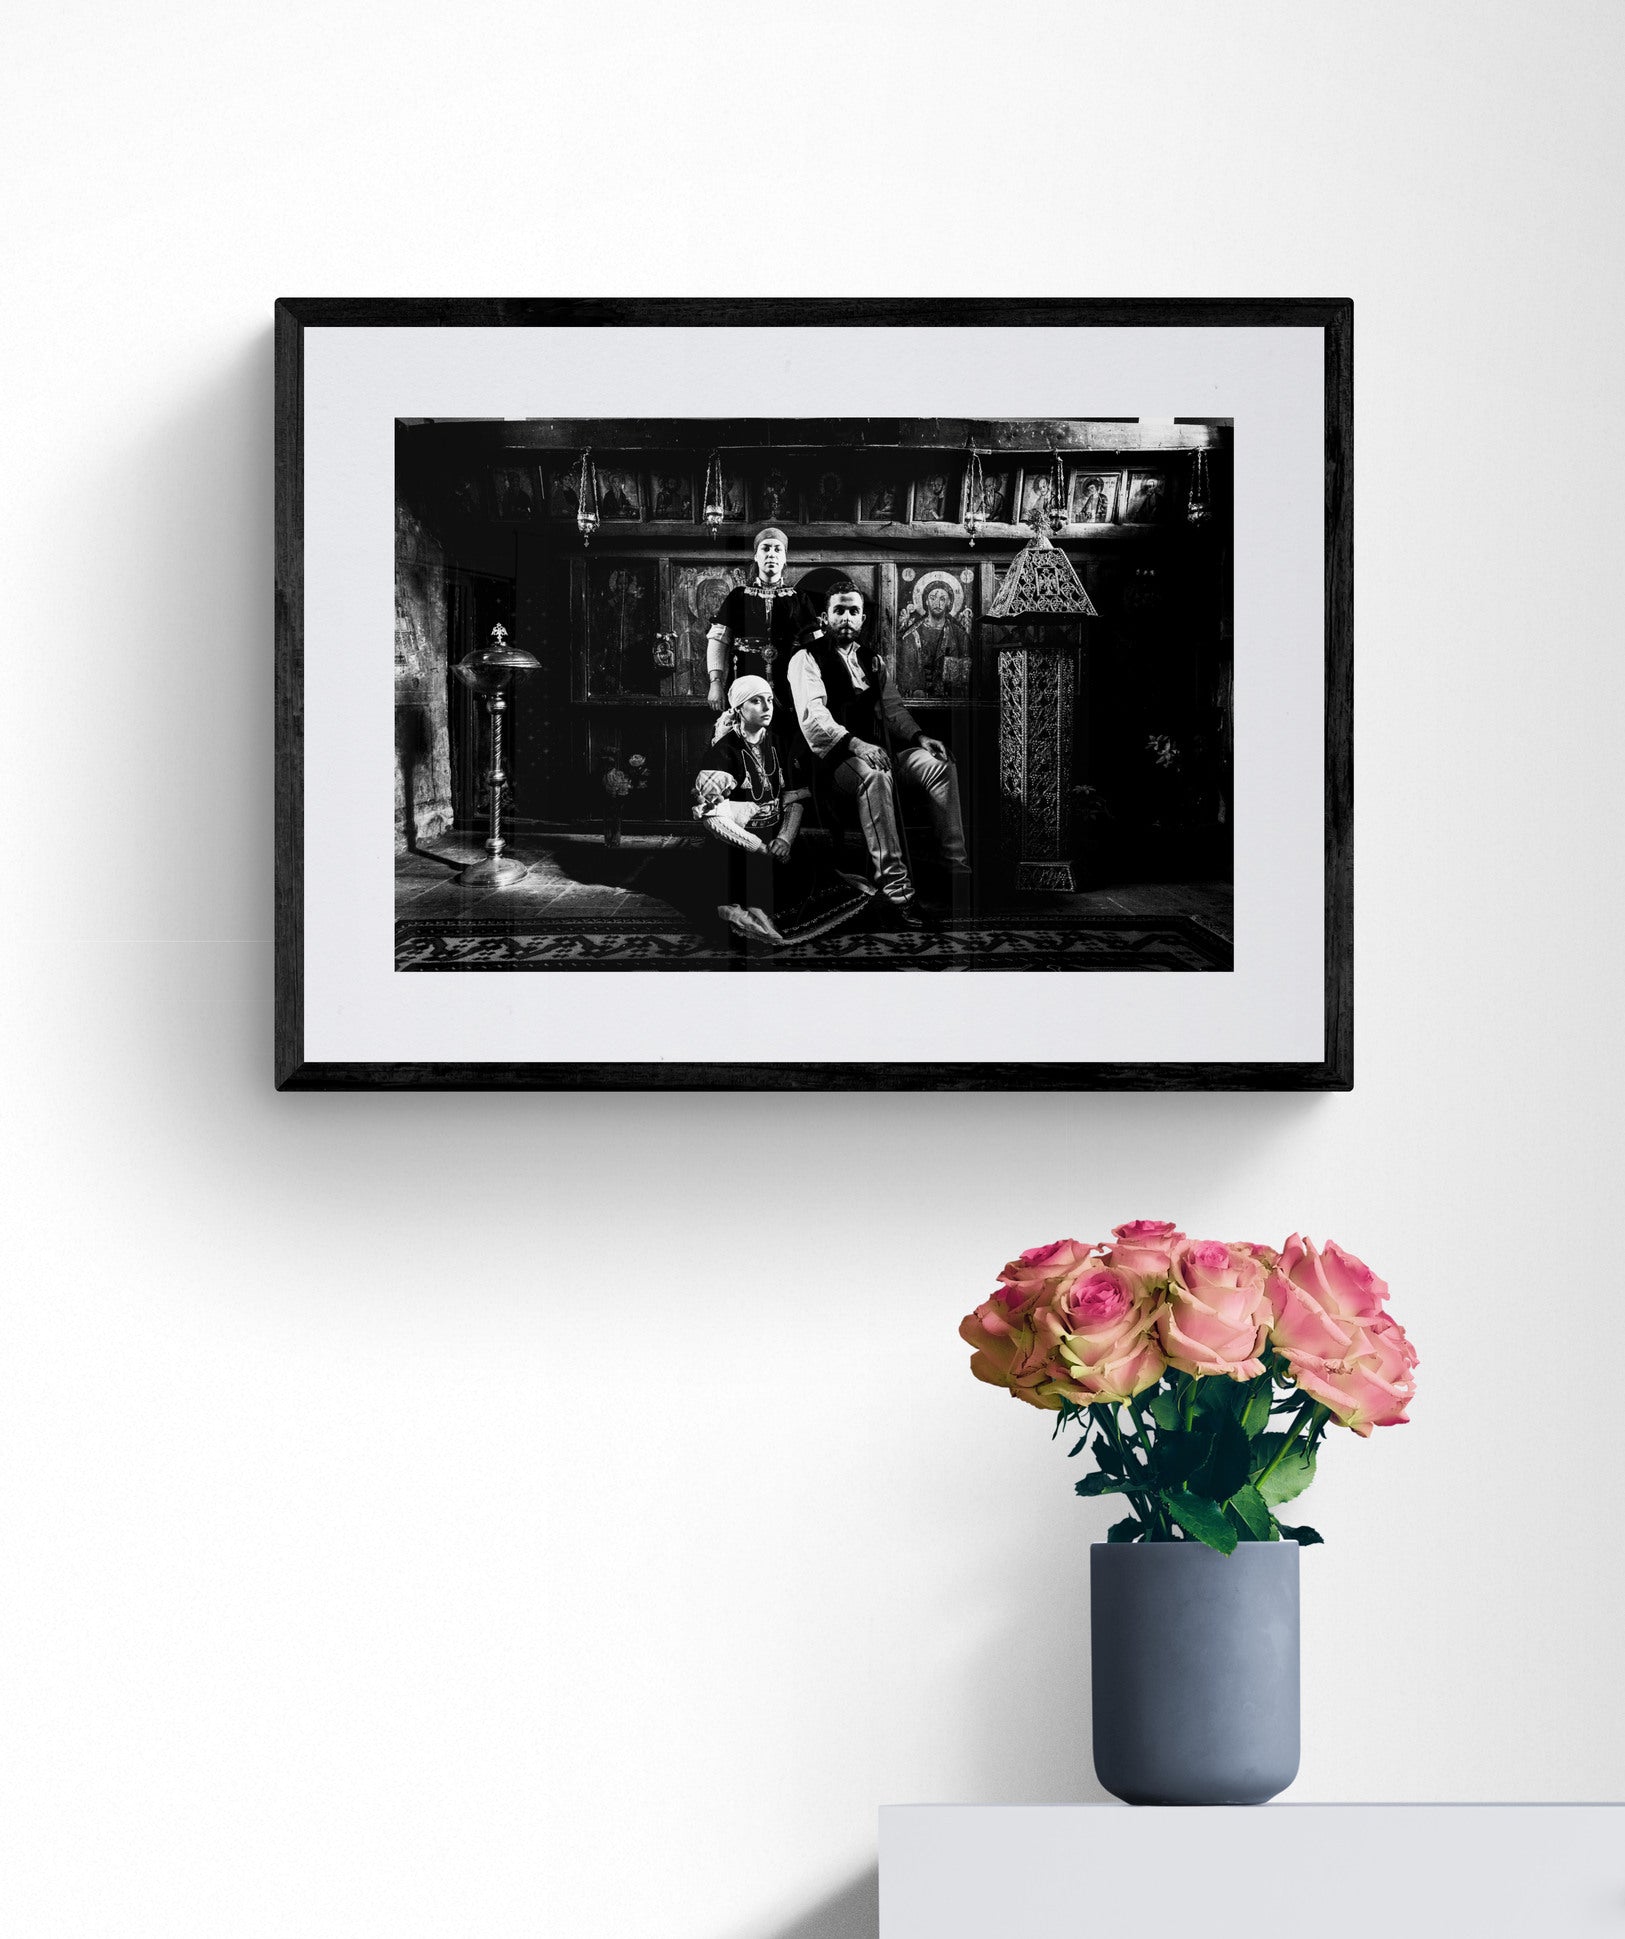 Black and White Photography Wall Art Greece | Costumes of Prespes at a local church W. Macedonia by George Tatakis - single framed photo